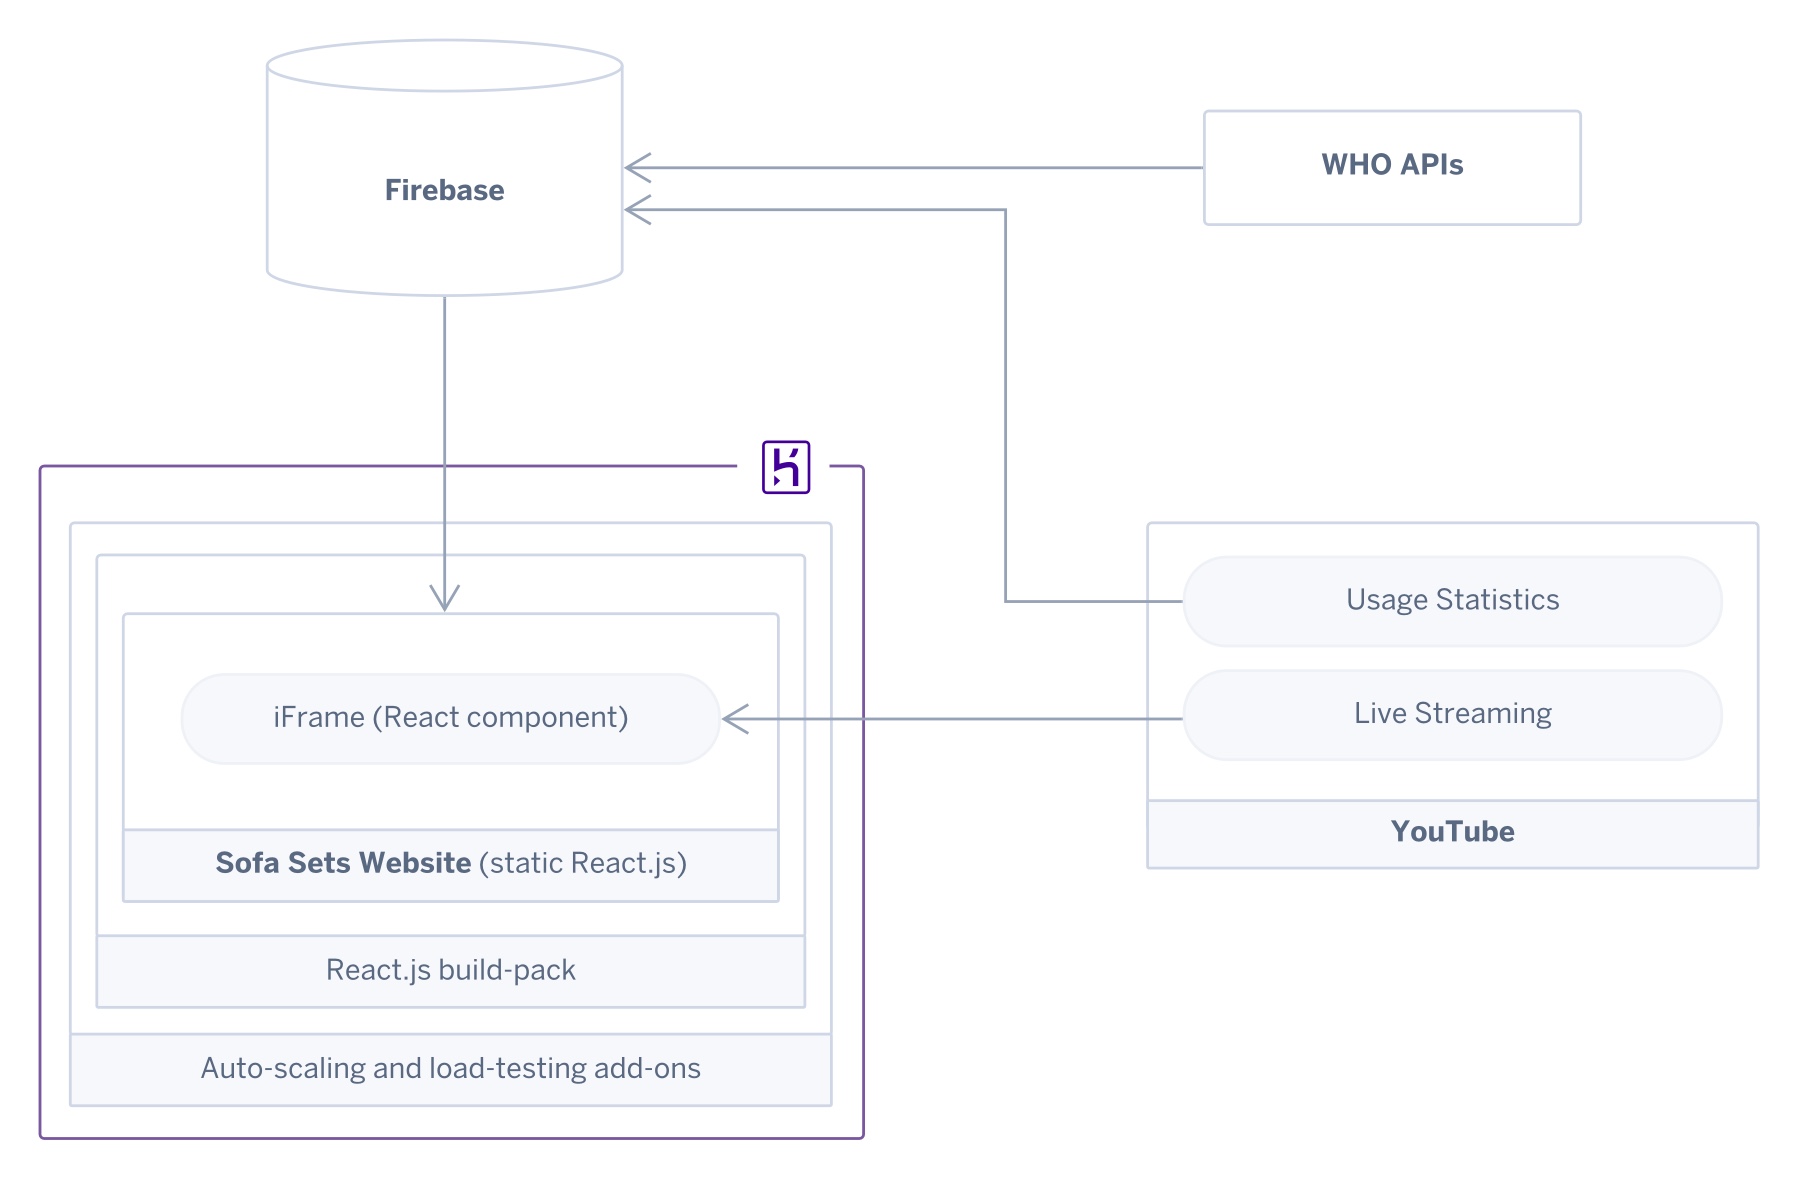 A diagram showing the architecture of the Heroku app and its connections to YouTube and Firebase